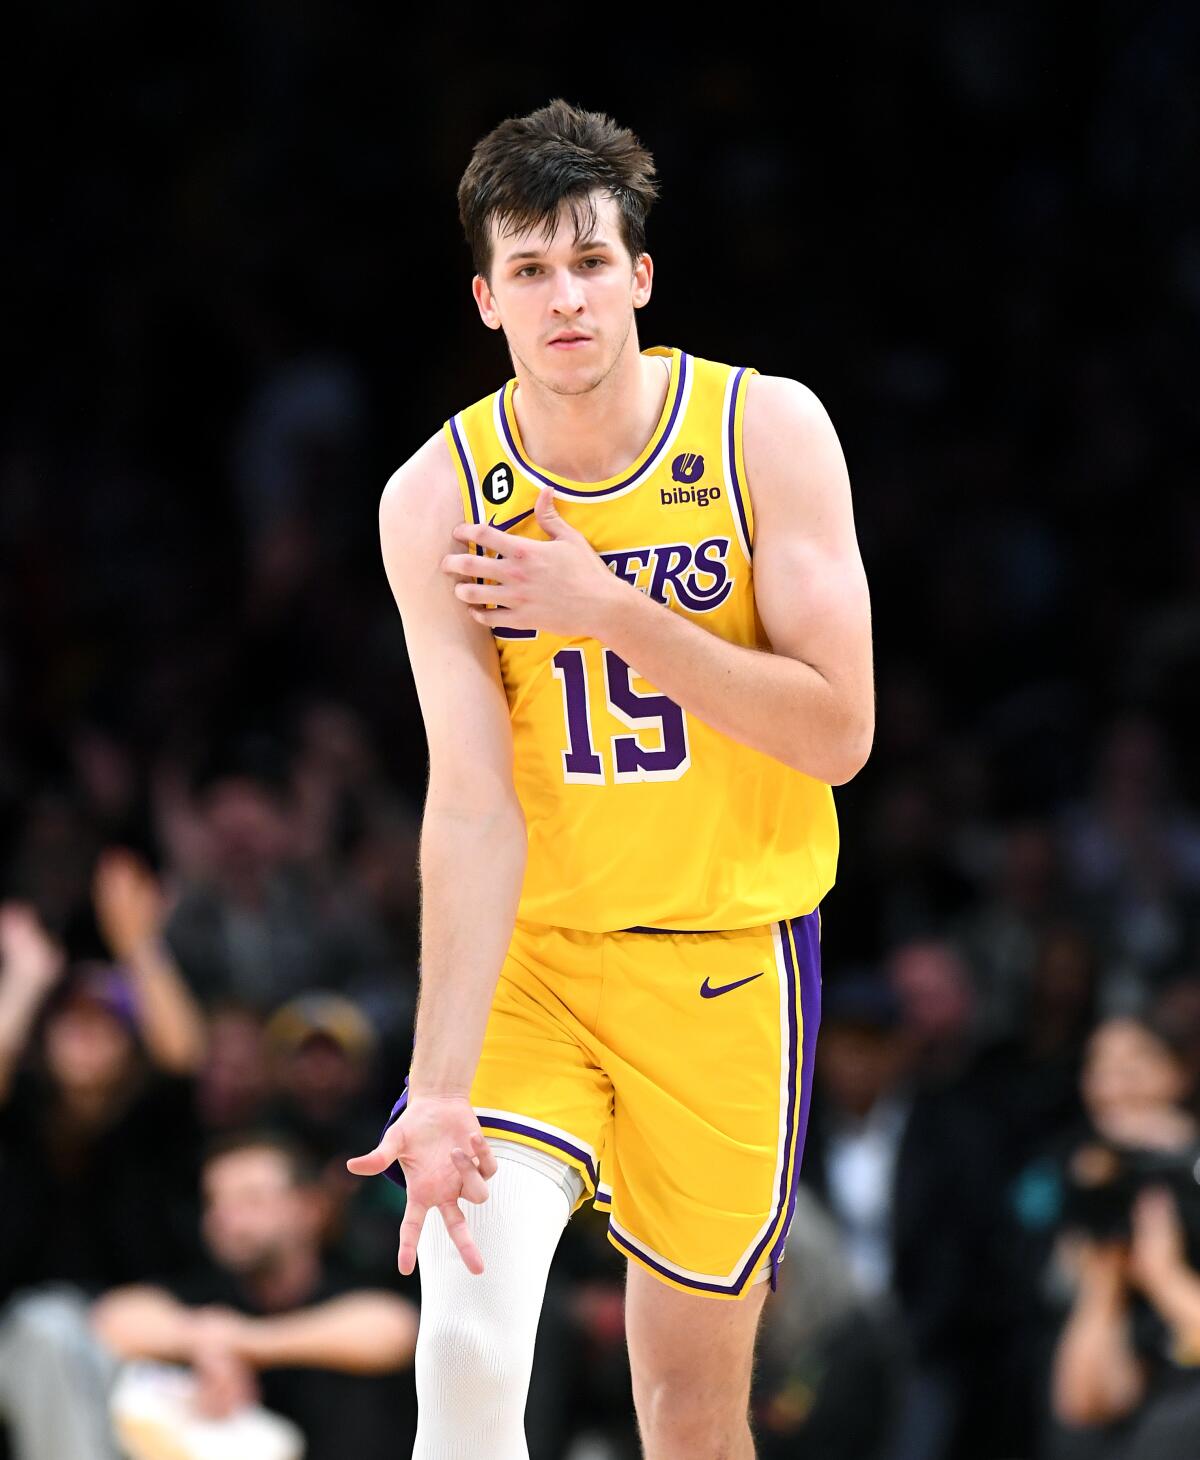 Lakers guard Austin Reaves celebrates his three-pointer against the Grizzlies by pointing to the ice in his veins.